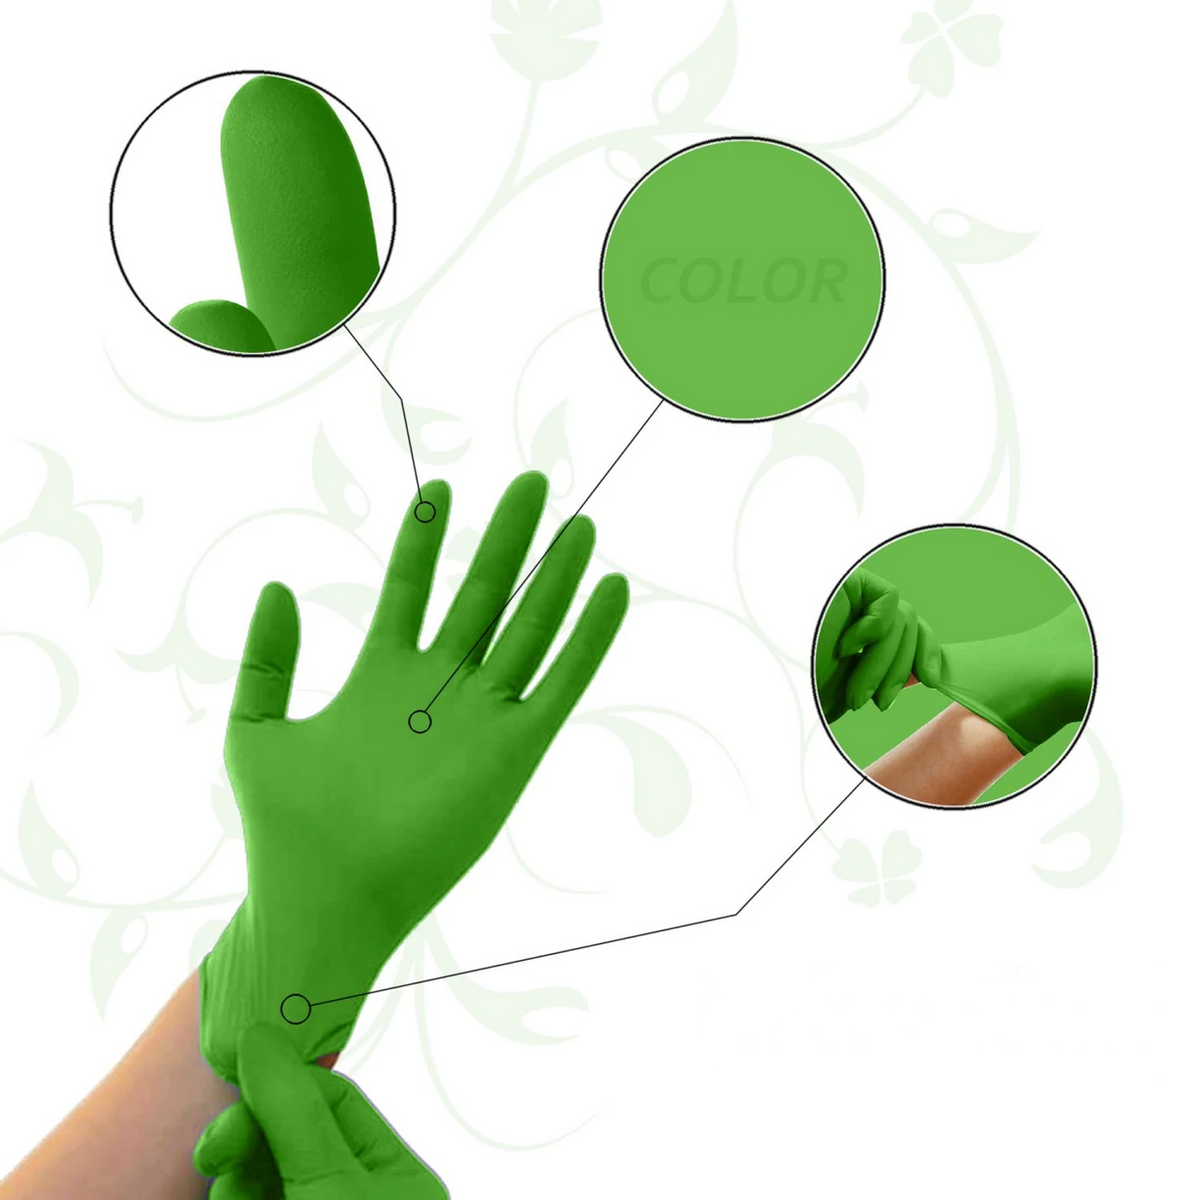 Wearing green glove in the hand